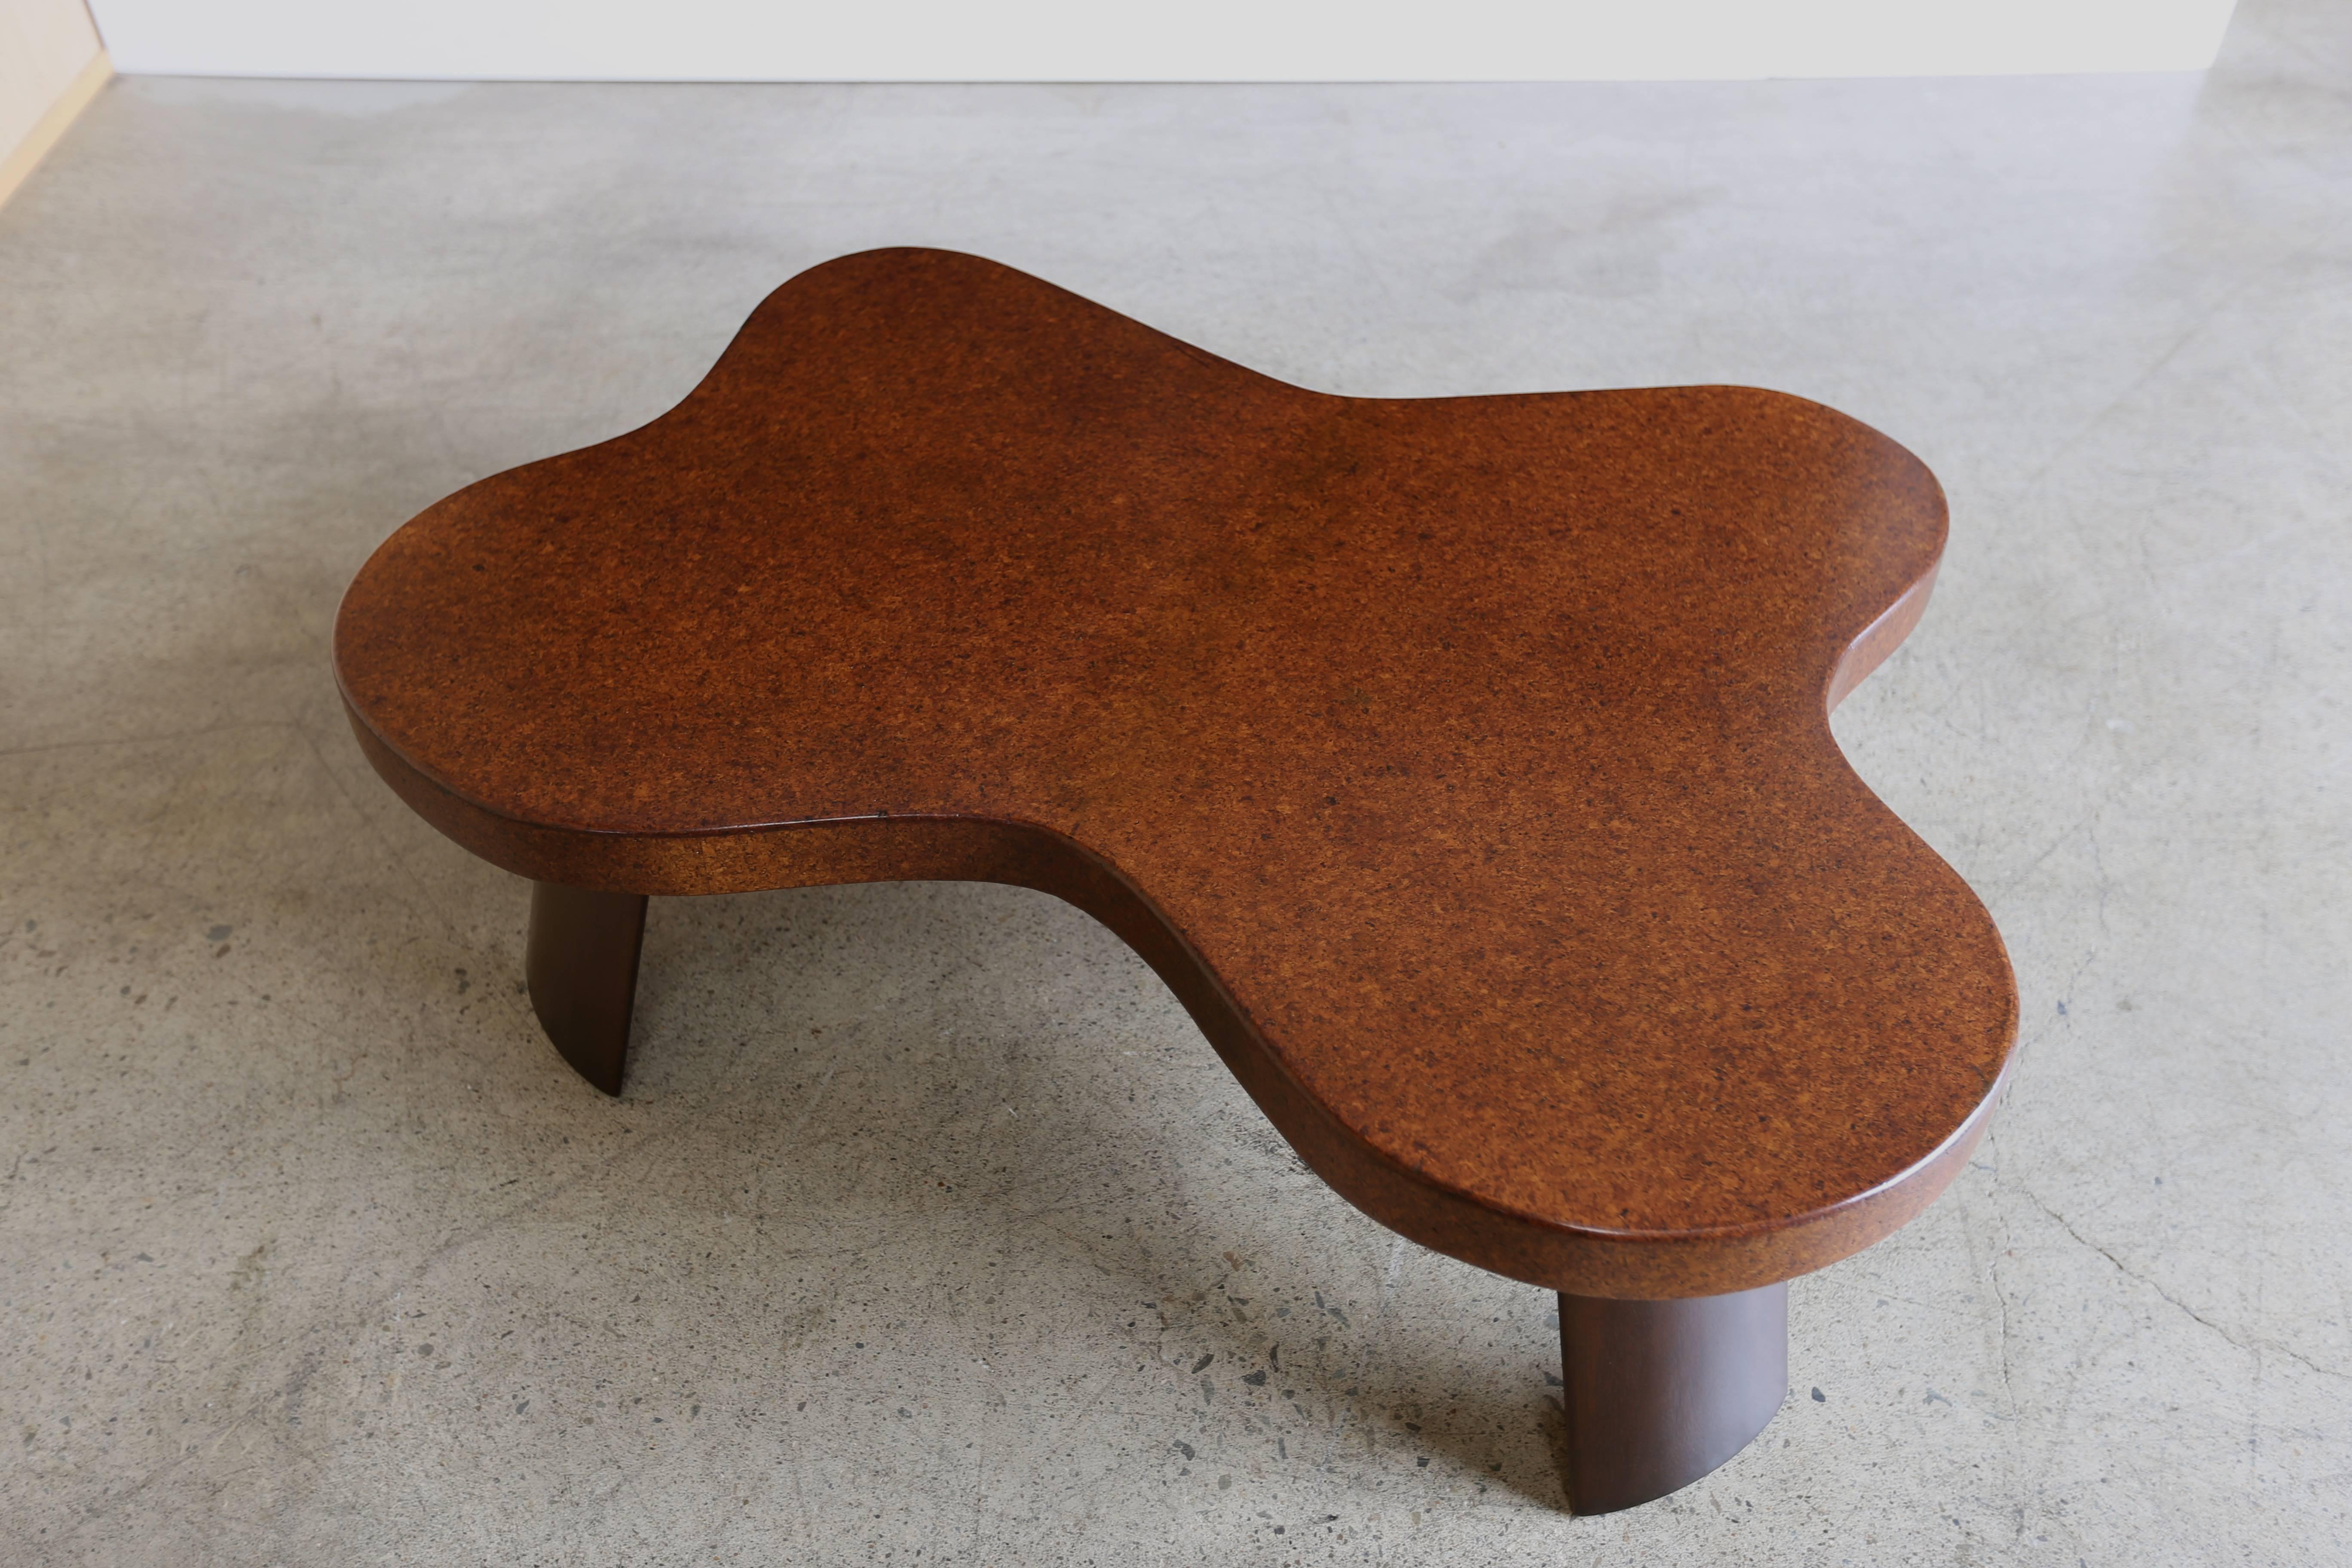 Rare Amoeba / Cloud cork top coffee table by Paul Frankl for Johnson Furniture Co.